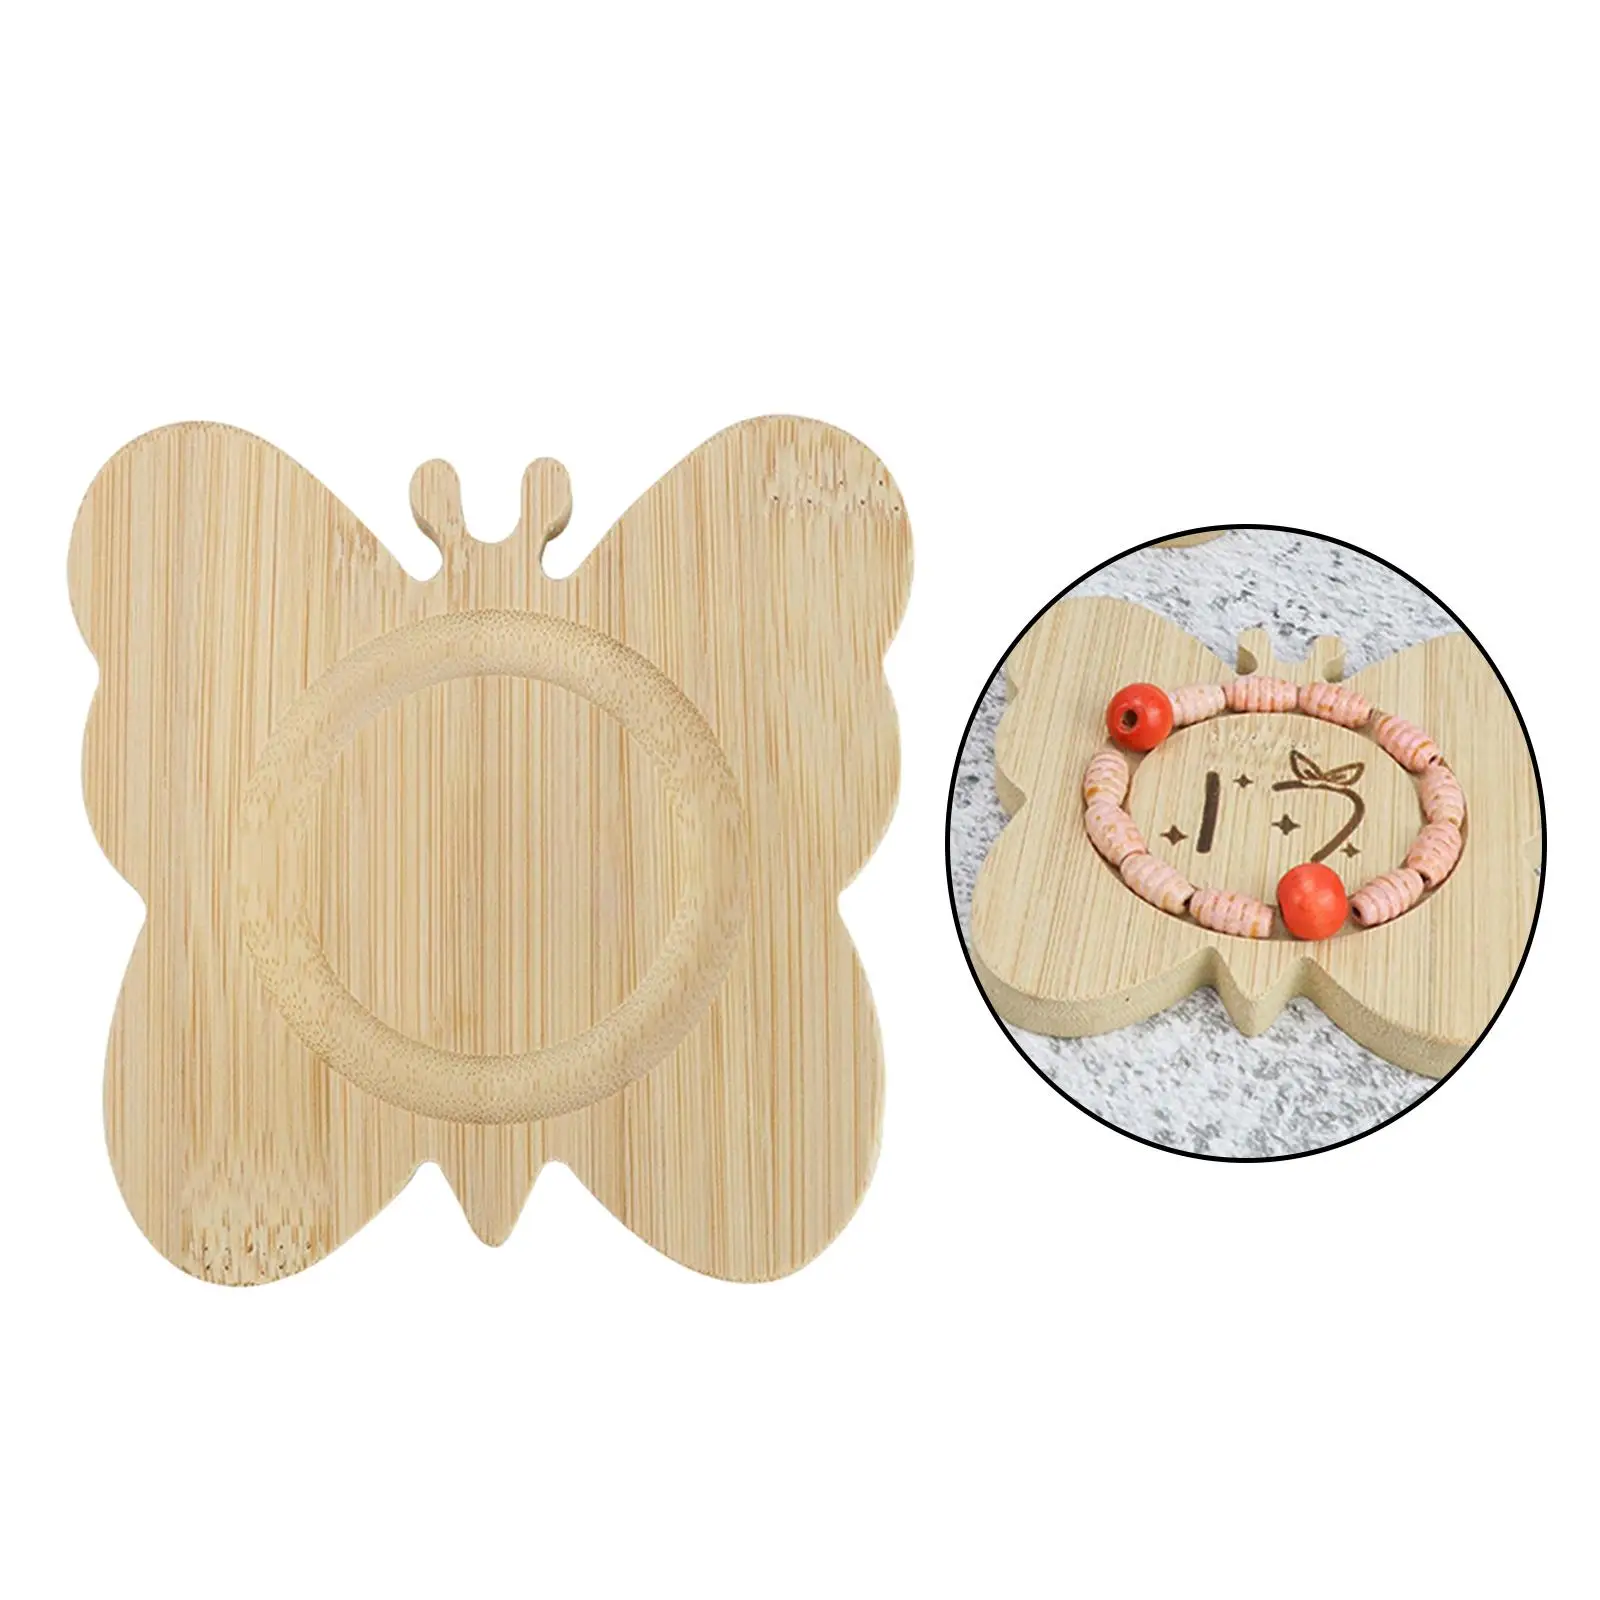 Wooden Jewelry Tray Jewelry Storage Butterfly Shaped 12cm Holder Multifunctional Showcase Show Bracelets Tray Bead Pendant Tray